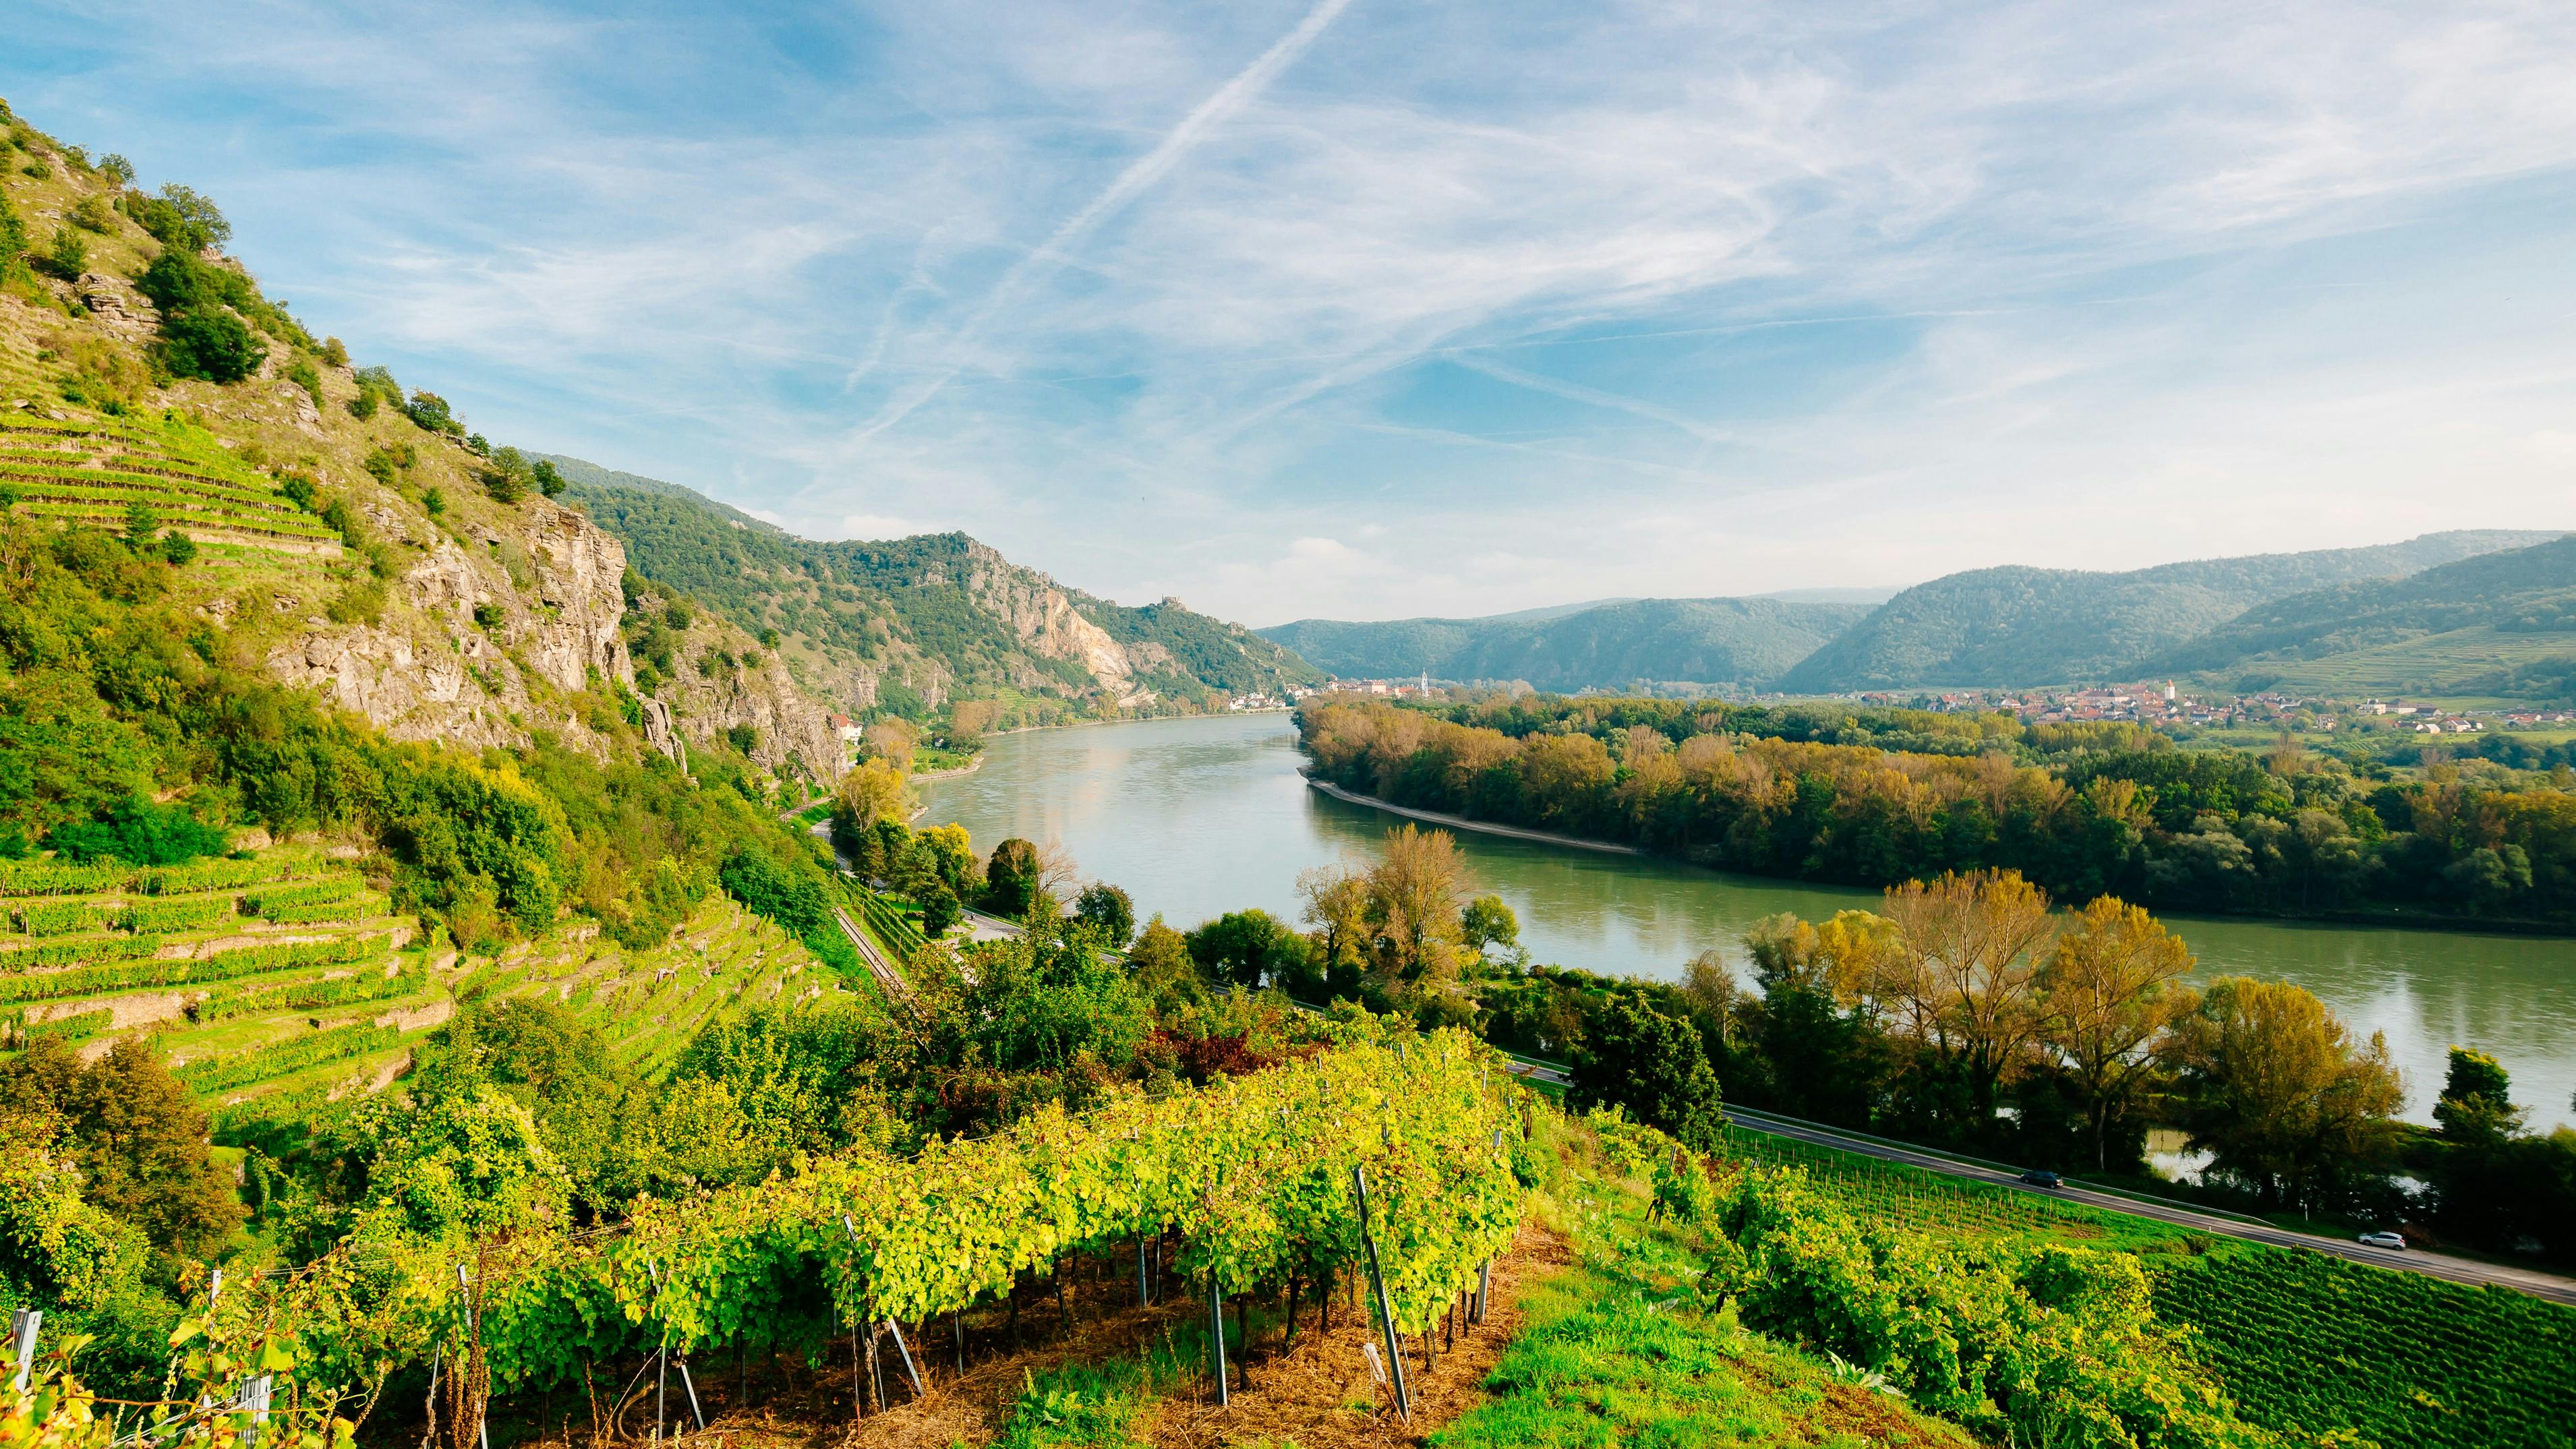 Wachau Valley Day Tour with Danube River Cruise Musement